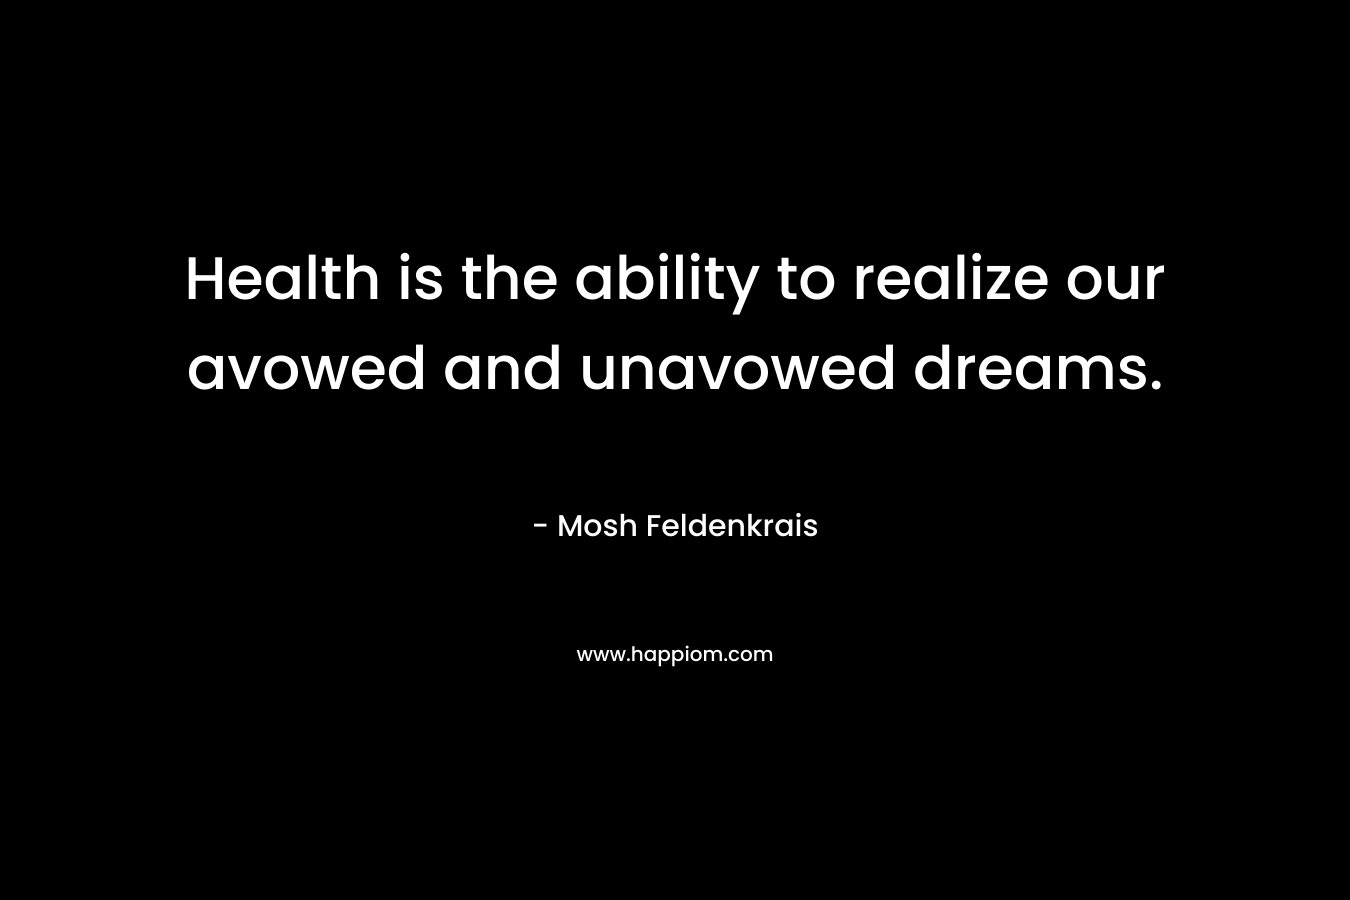 Health is the ability to realize our avowed and unavowed dreams.